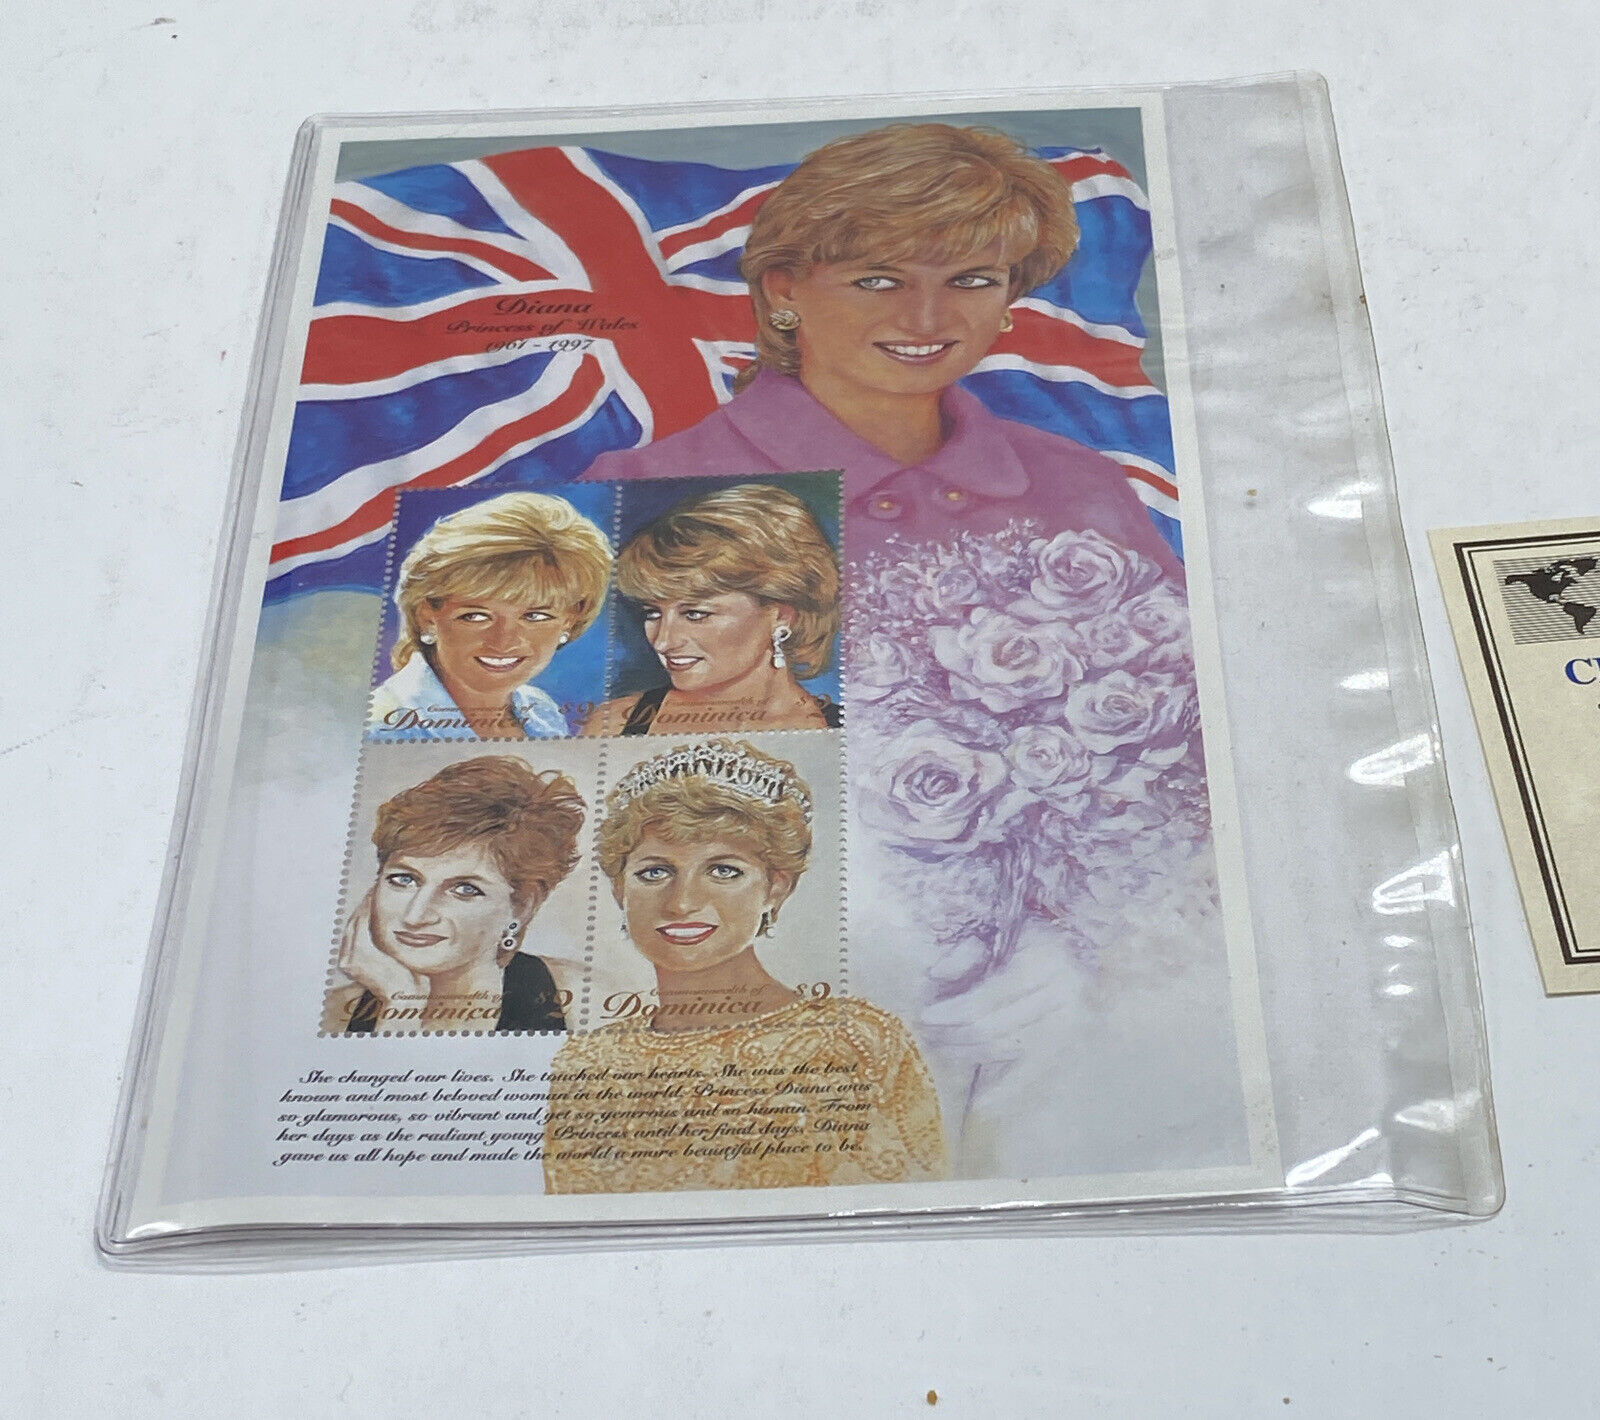 Princess Diana Royal Portraits Plate Block Of 4 Stamps Authenticity Certificate Без бренда - фотография #6